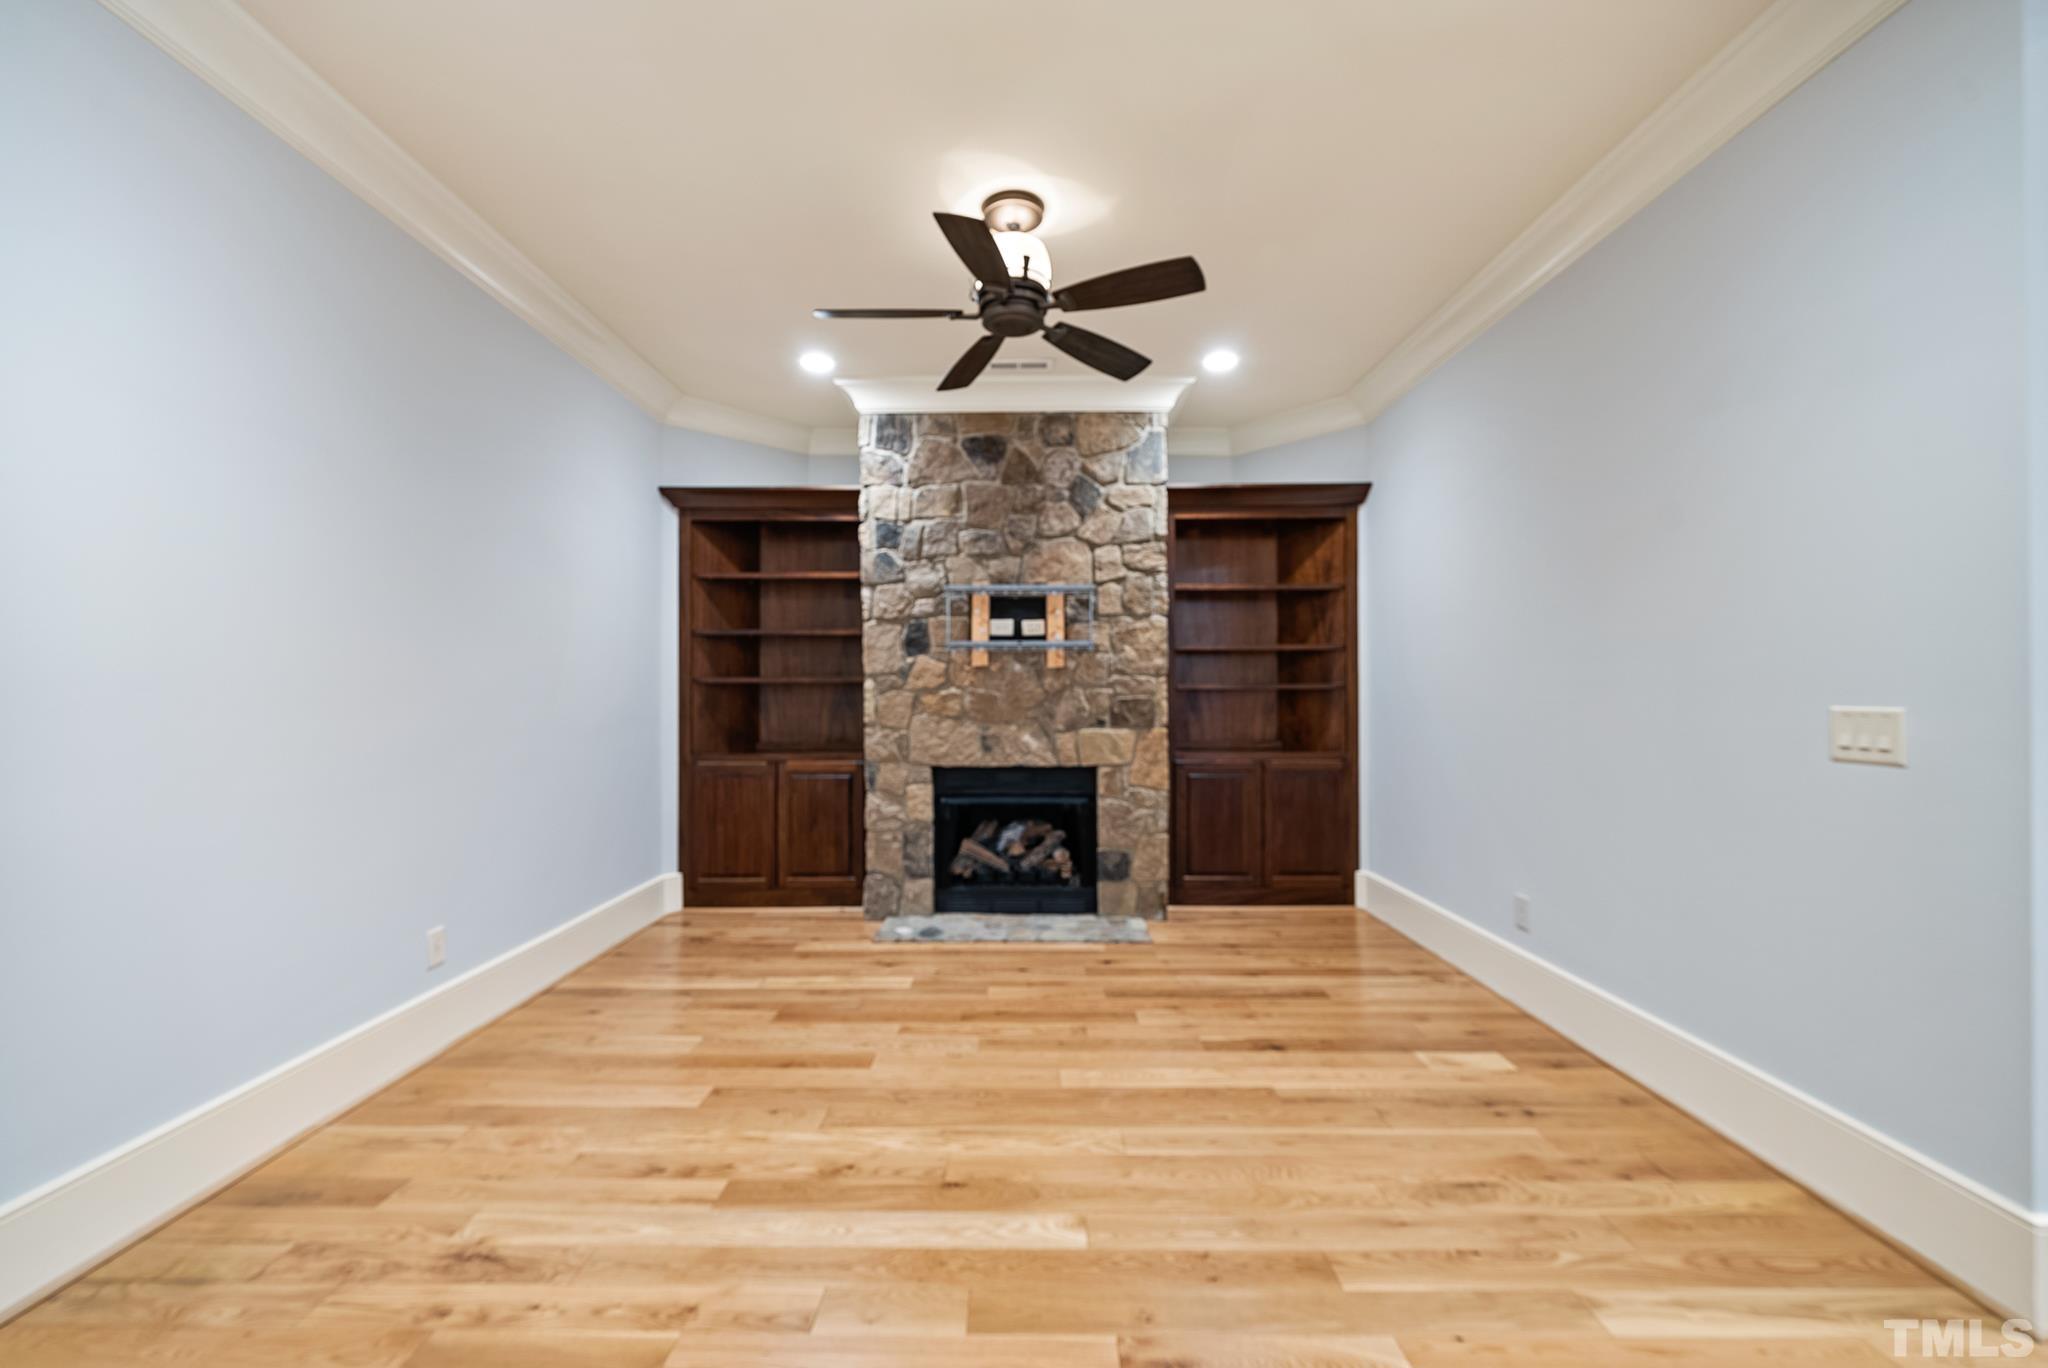 Daylight basement with separate exterior entrance would be perfect for In-law/nanny/teen suite. With Gas stone fireplace, built-in shelving flanking fireplace, full bath.